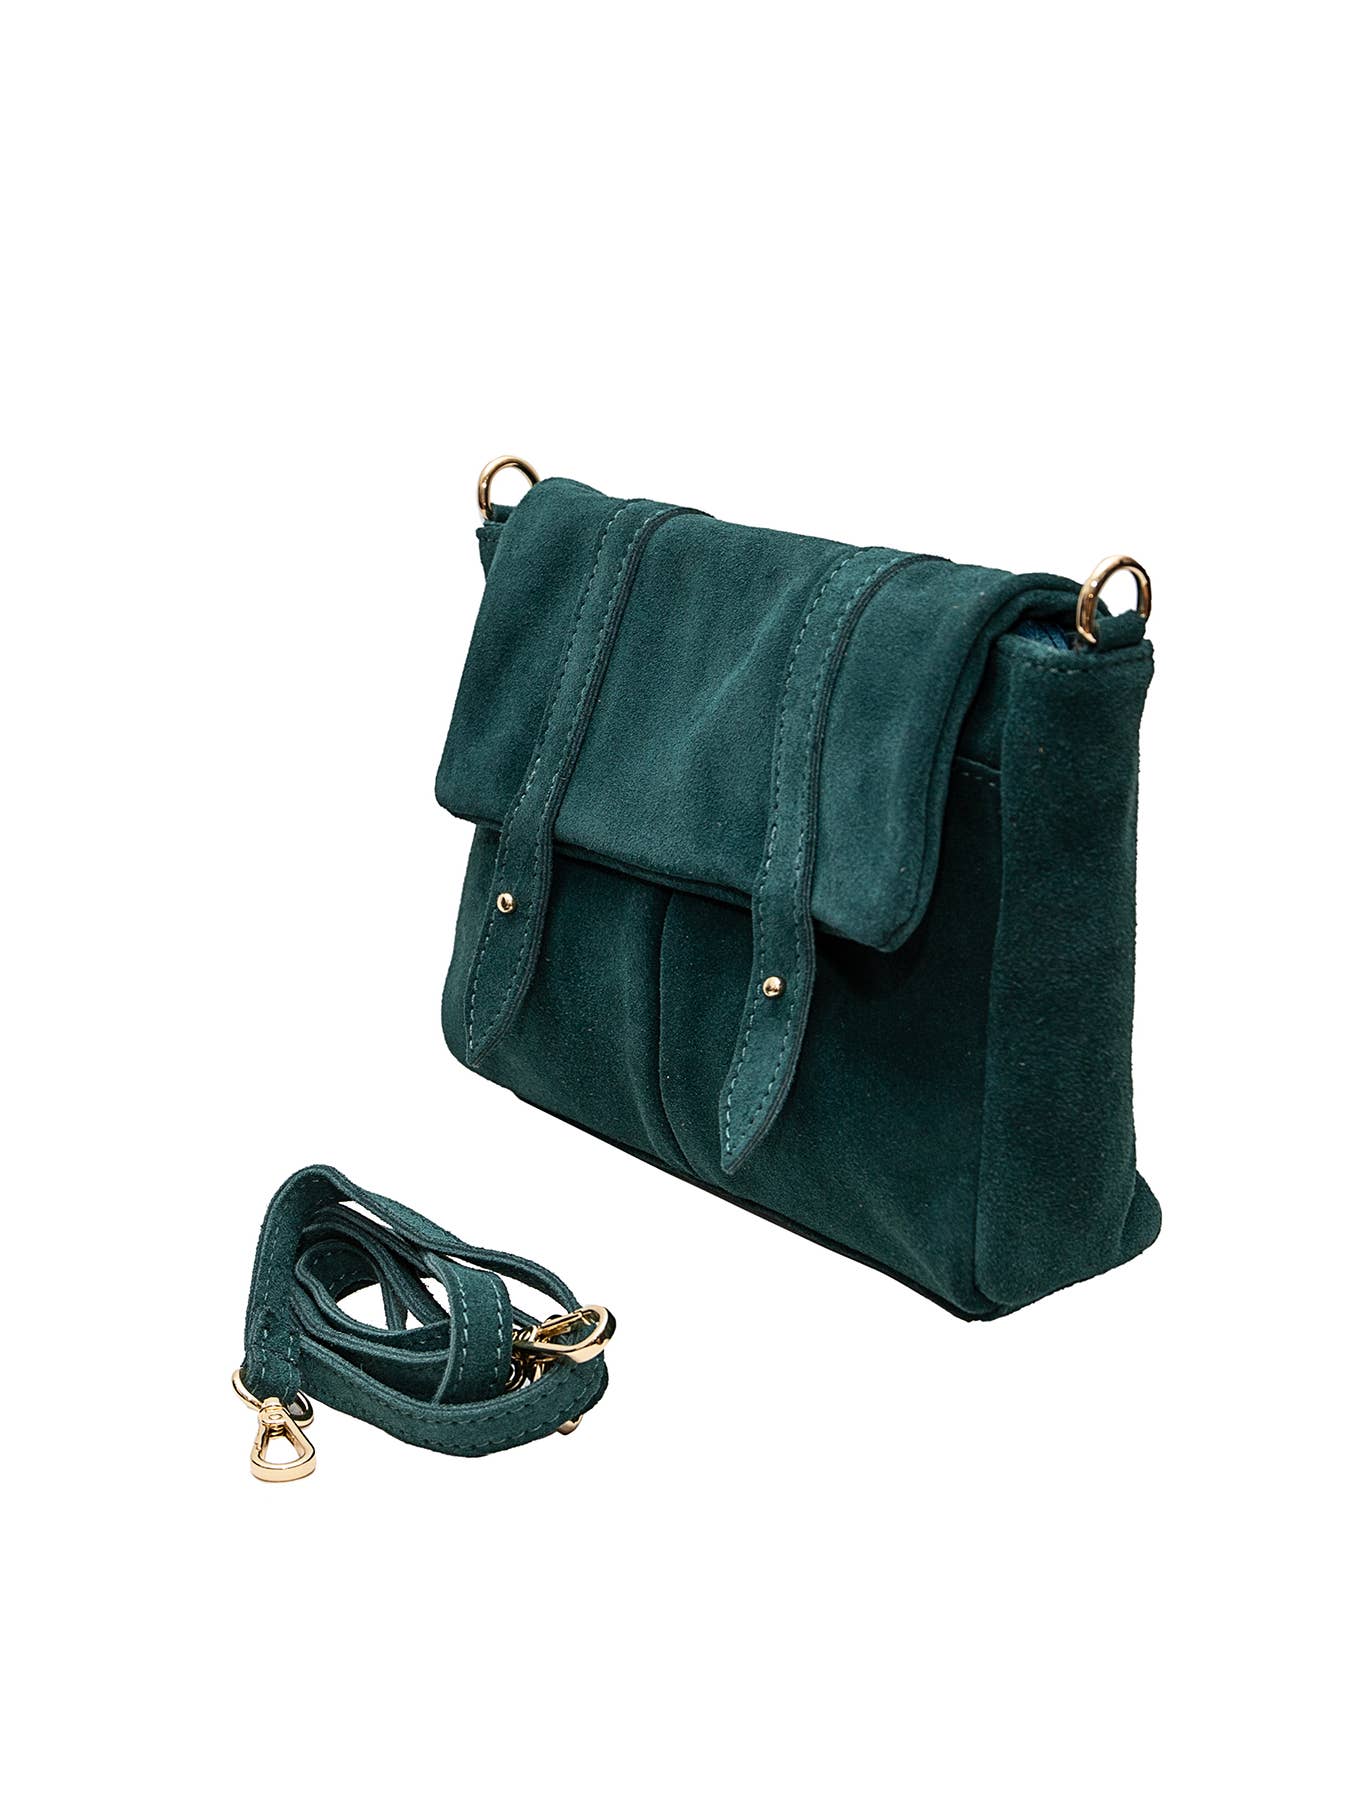 Everyday Suede Leather Satchel - Peacock